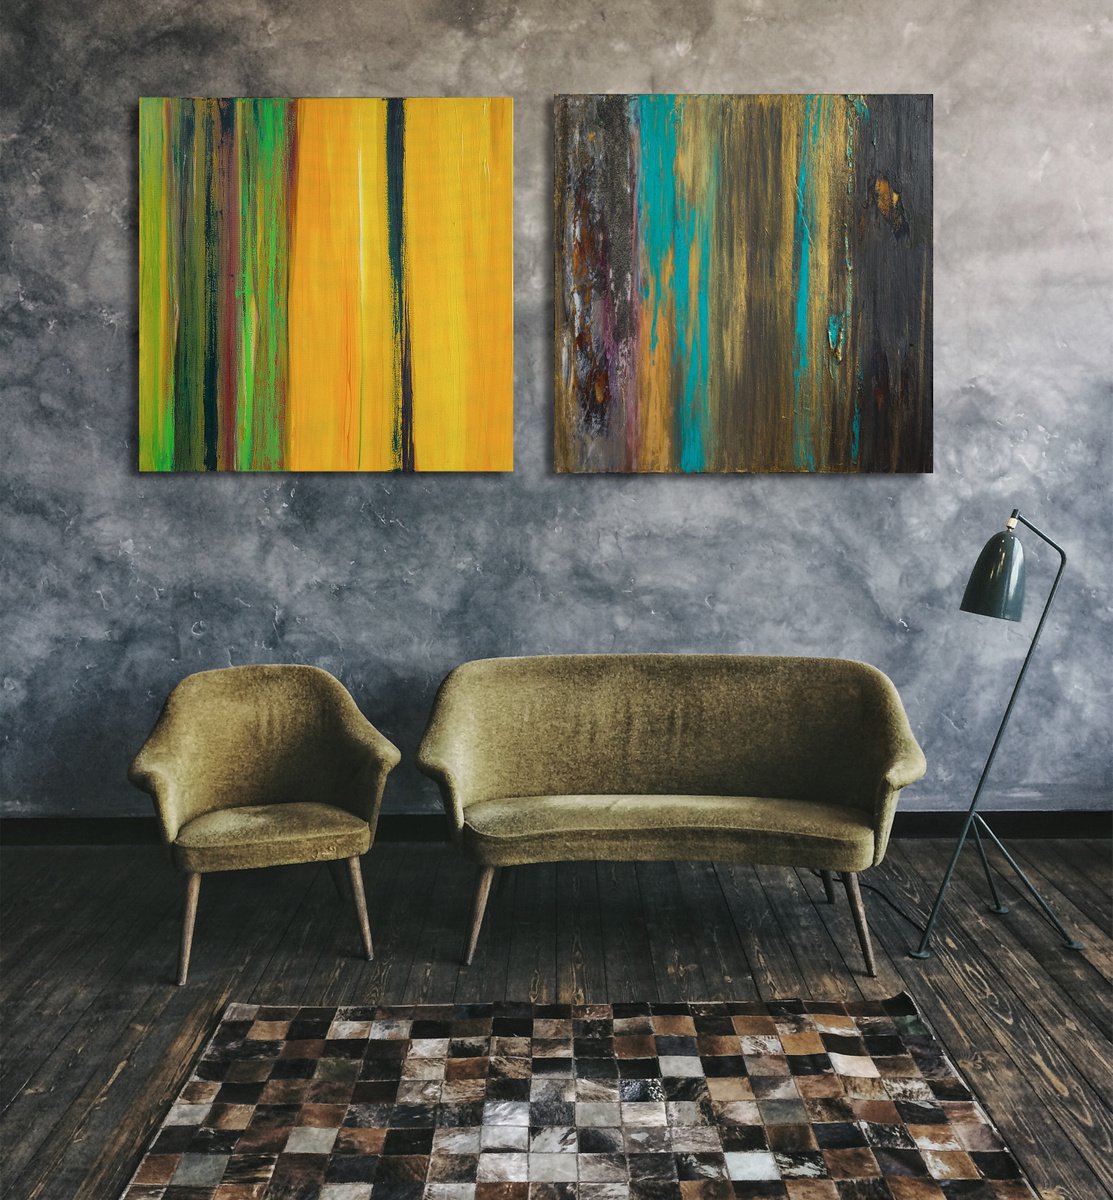 Cold and Sunny & Language of Passion | (diptych) 2x(100x100x4cm) by Cornelia Petrea - Abstract Art